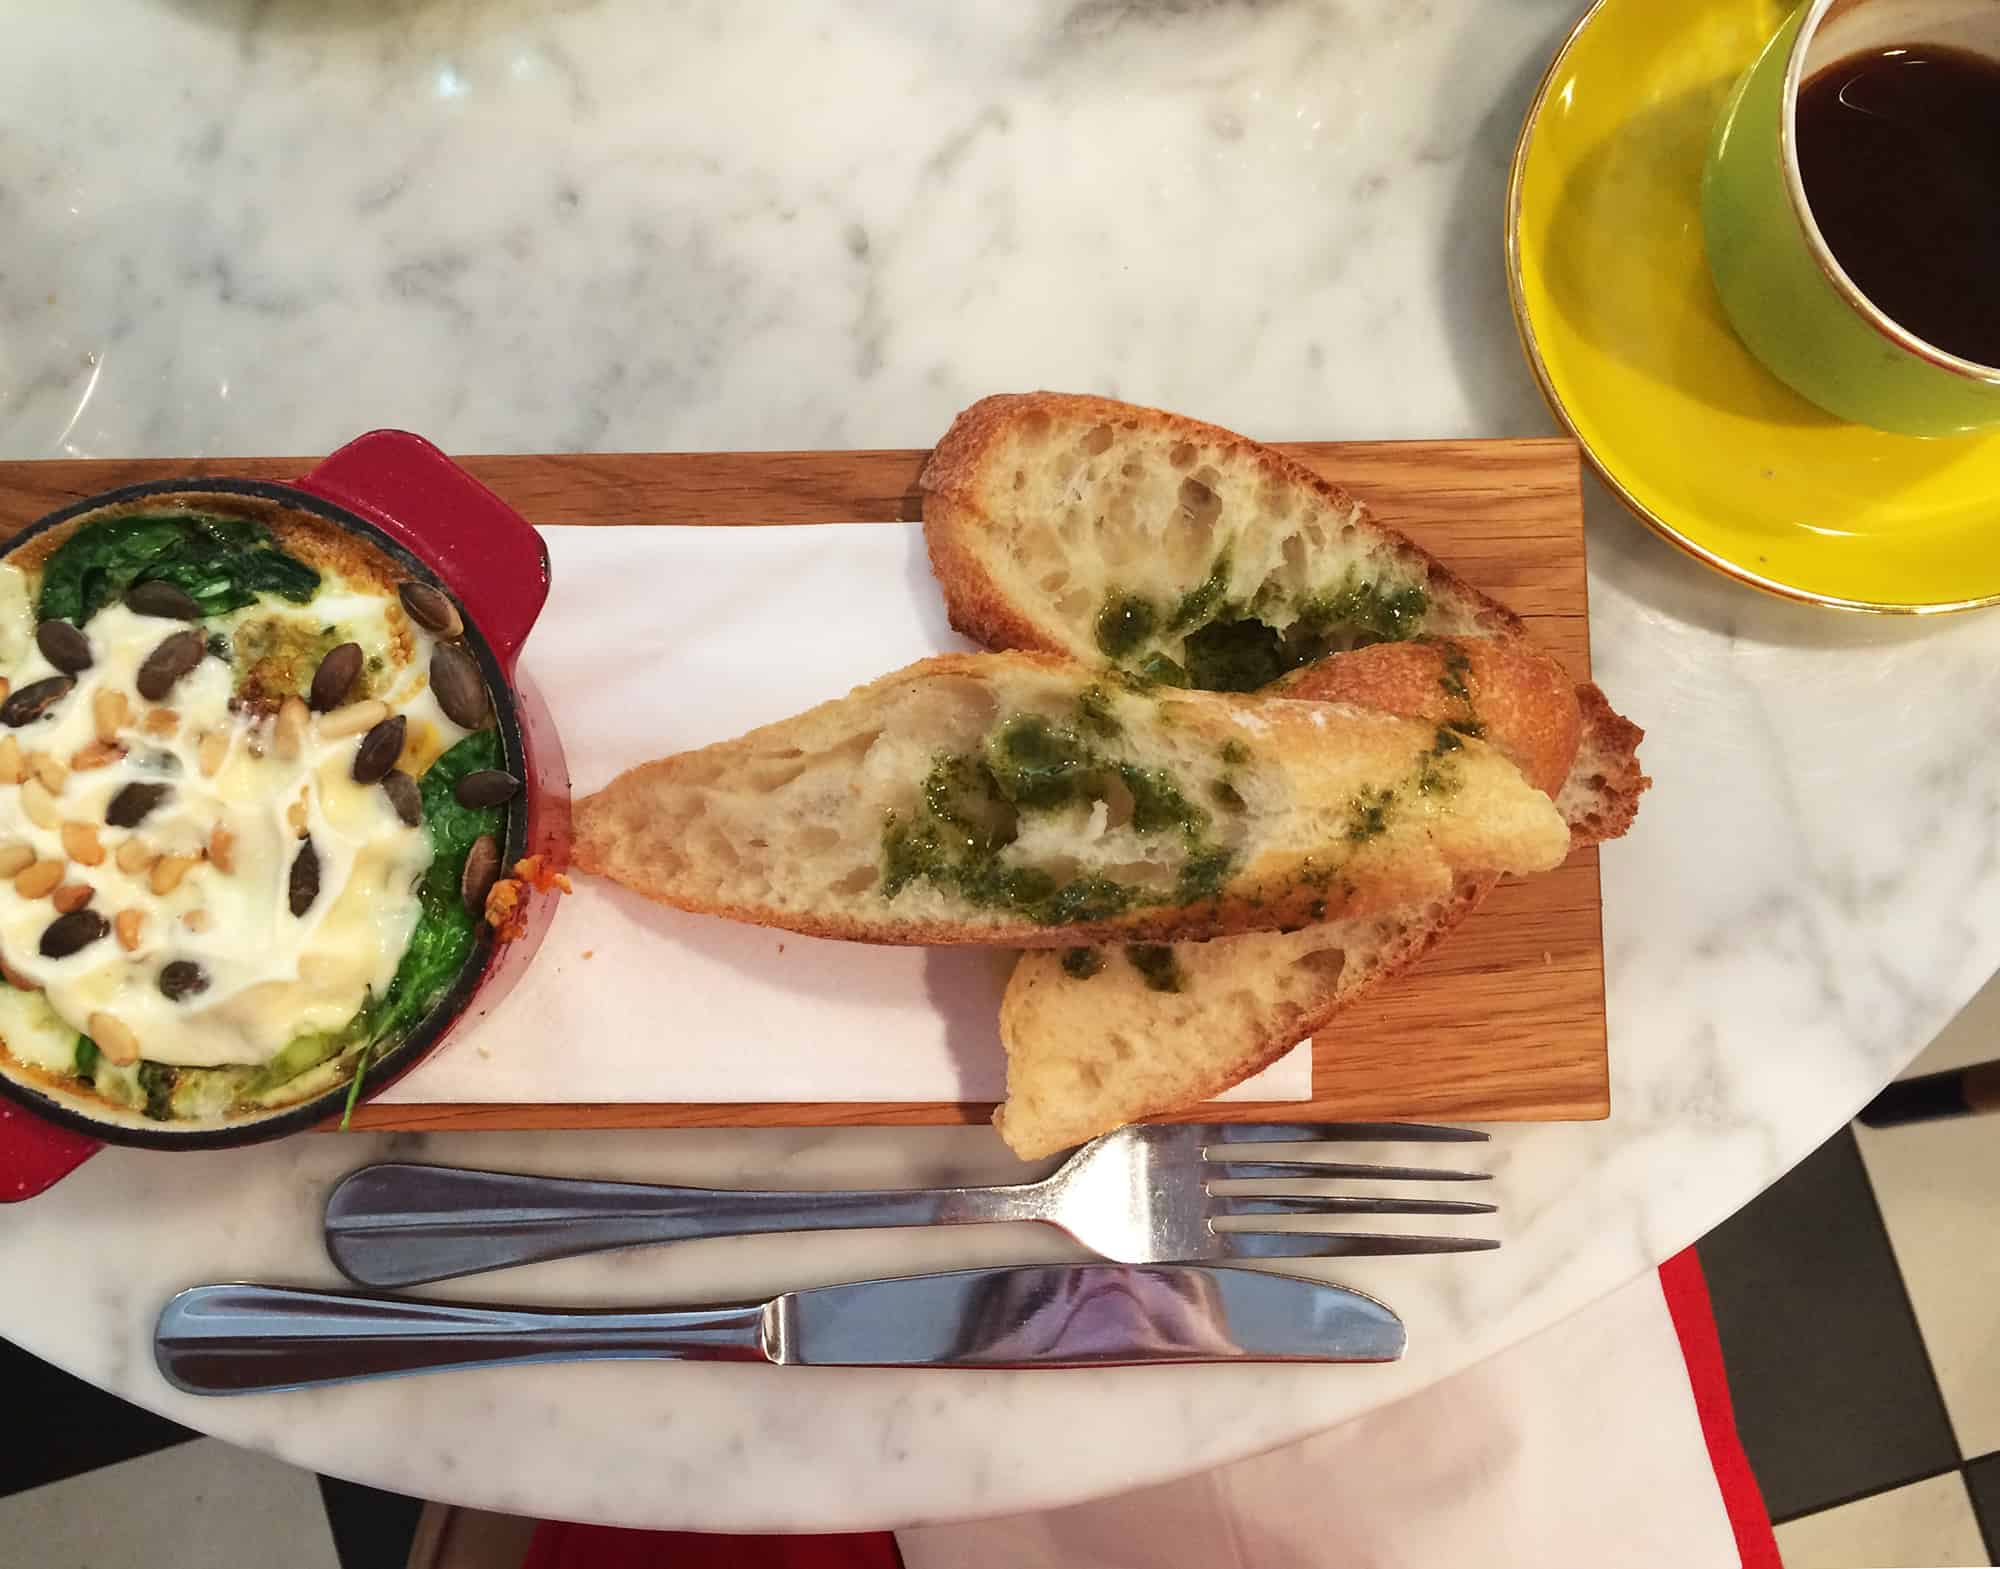 One of the best coffee shops for brunch in Paris is Hardware Sociéte in Montmartre, for its homemade fare and coffee.